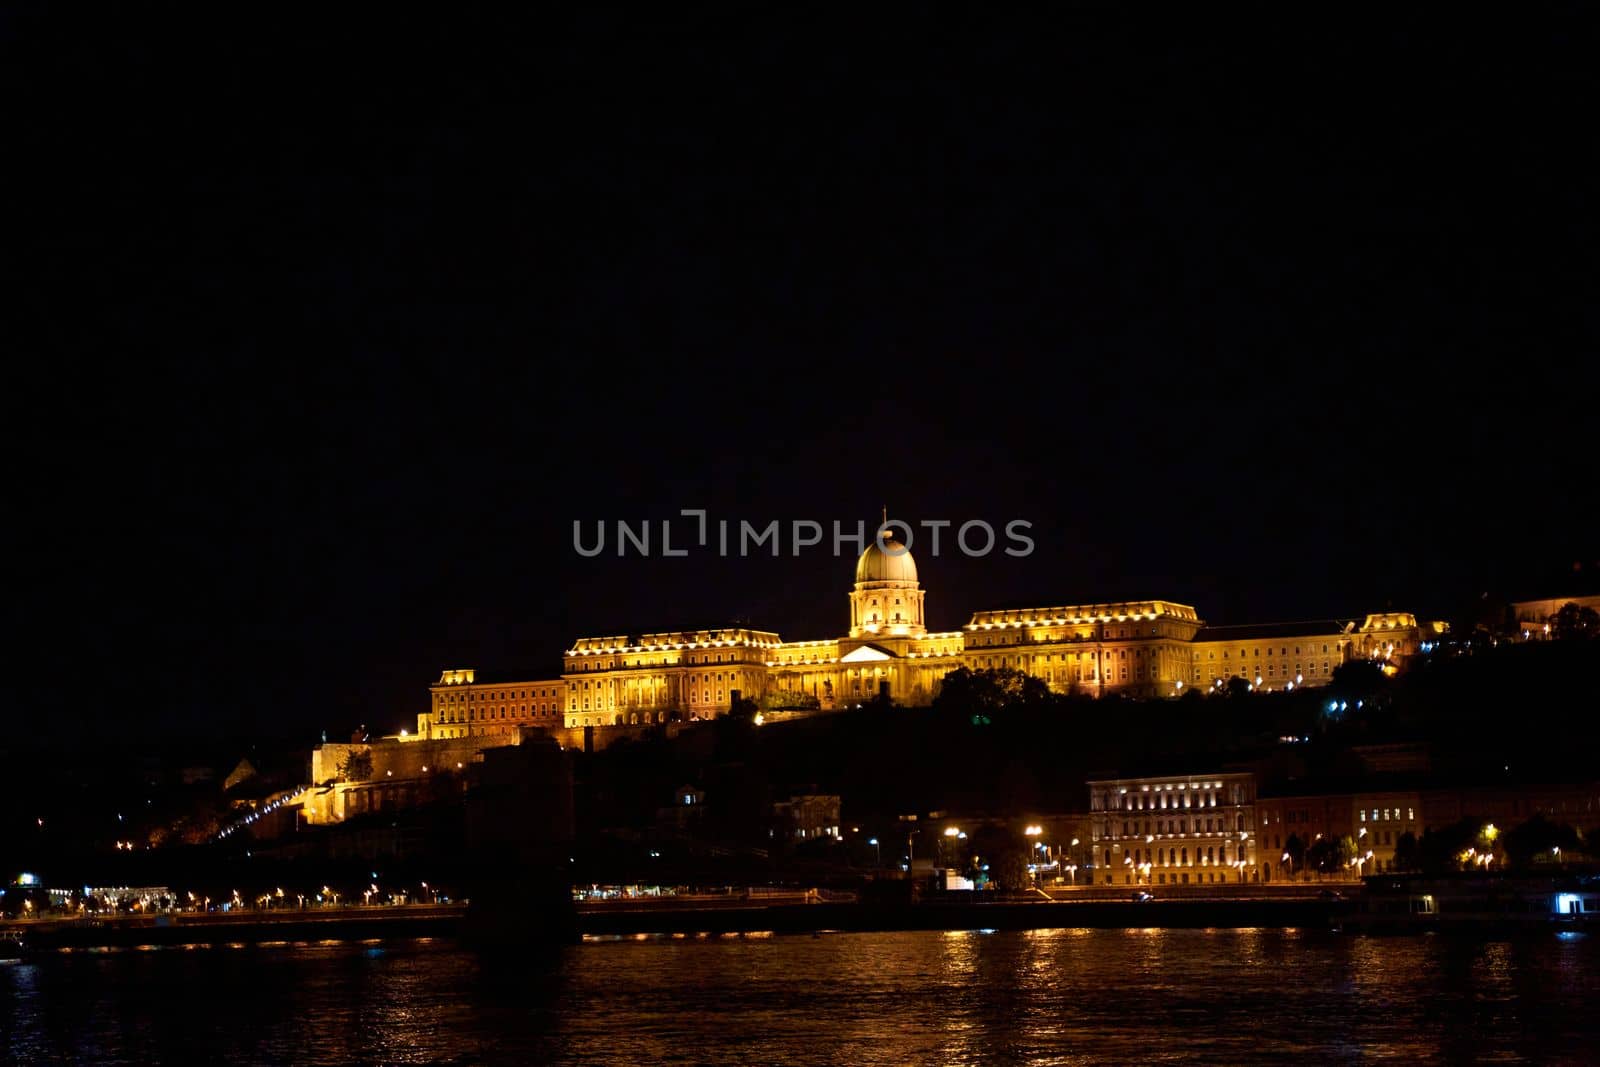 Budapest night landscape with lots of lanterns and illuminated buildings. A pleasure boat is sailing on the river by Try_my_best